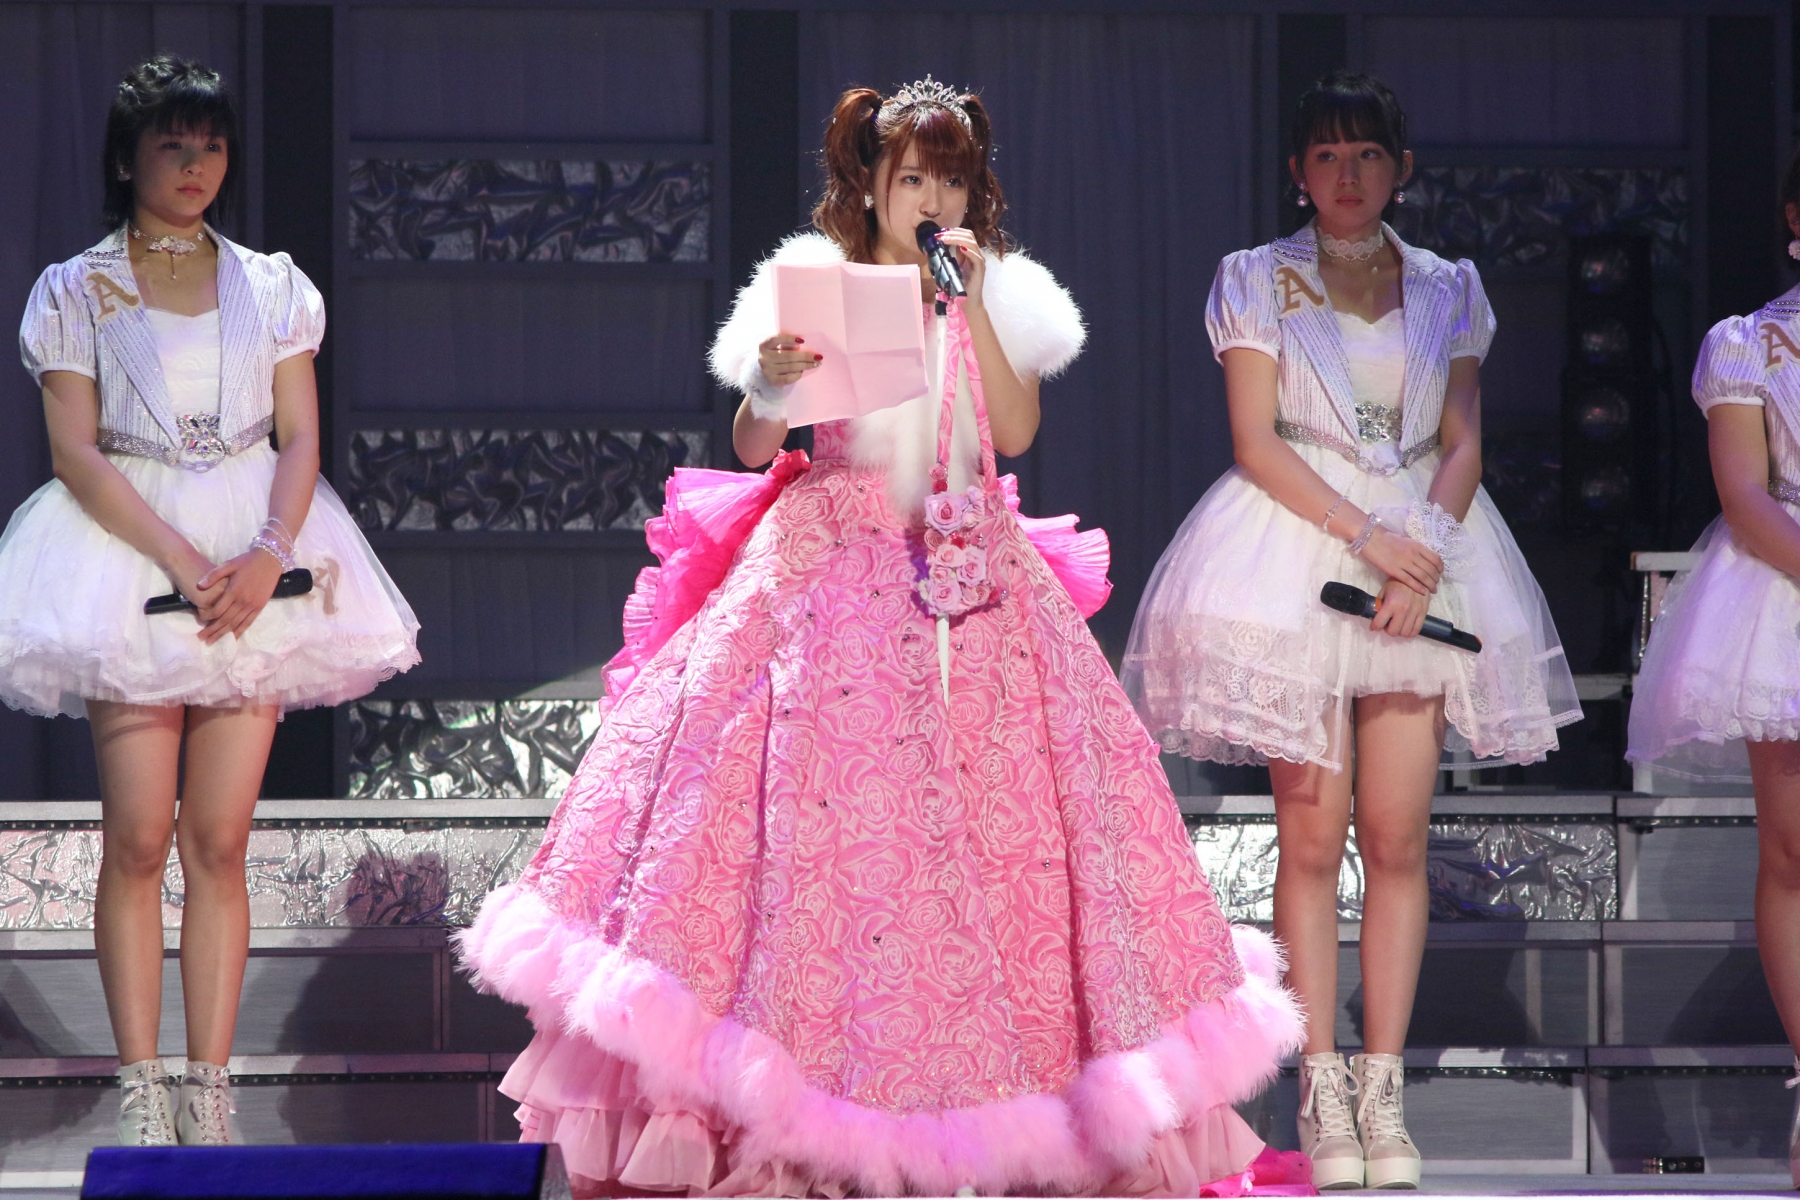 Kanon Fukuda Graduates ANGERME In Tears And Takes Her Next Step To Become a Song Writer